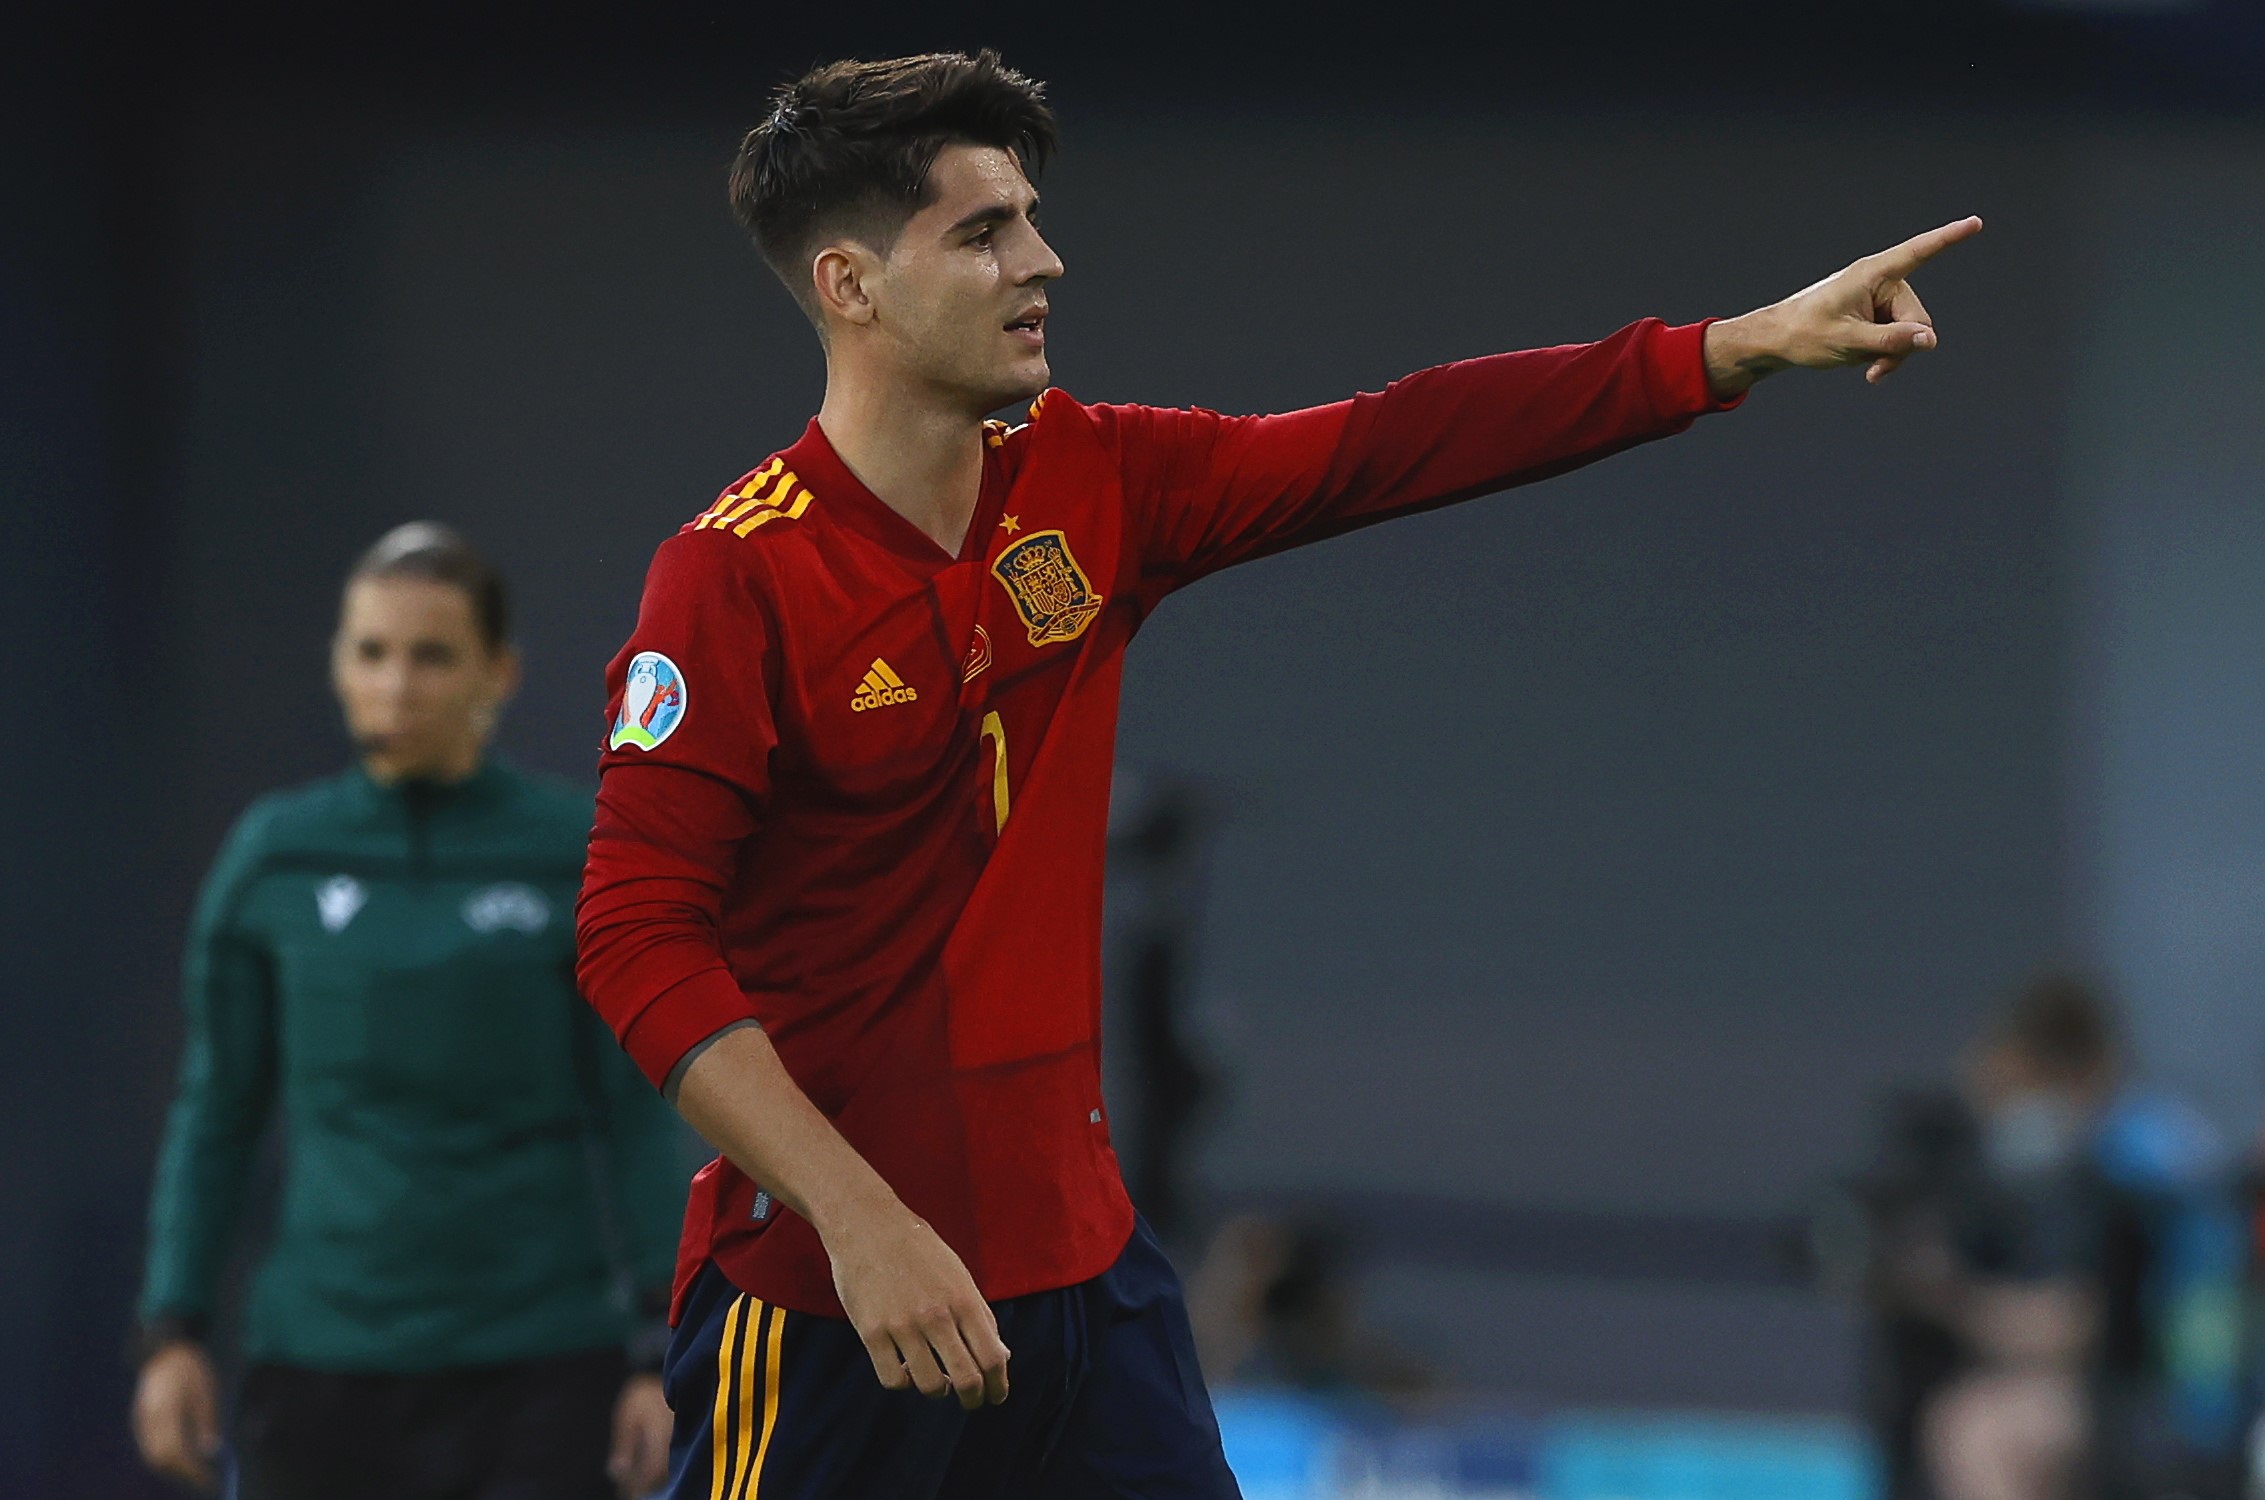 epa09286874 Alvaro Morata of Spain celebrates after scoring the 1-0 lead during the UEFA EURO 2020 group E preliminary round soccer match between Spain and Poland in Seville, Spain, 19 June 2021.  EPA/Marcel Del Pozo / POOL (RESTRICTIONS: For editorial news reporting purposes only. Images must appear as still images and must not emulate match action video footage. Photographs published in online publications shall have an interval of at least 20 seconds between the posting.)